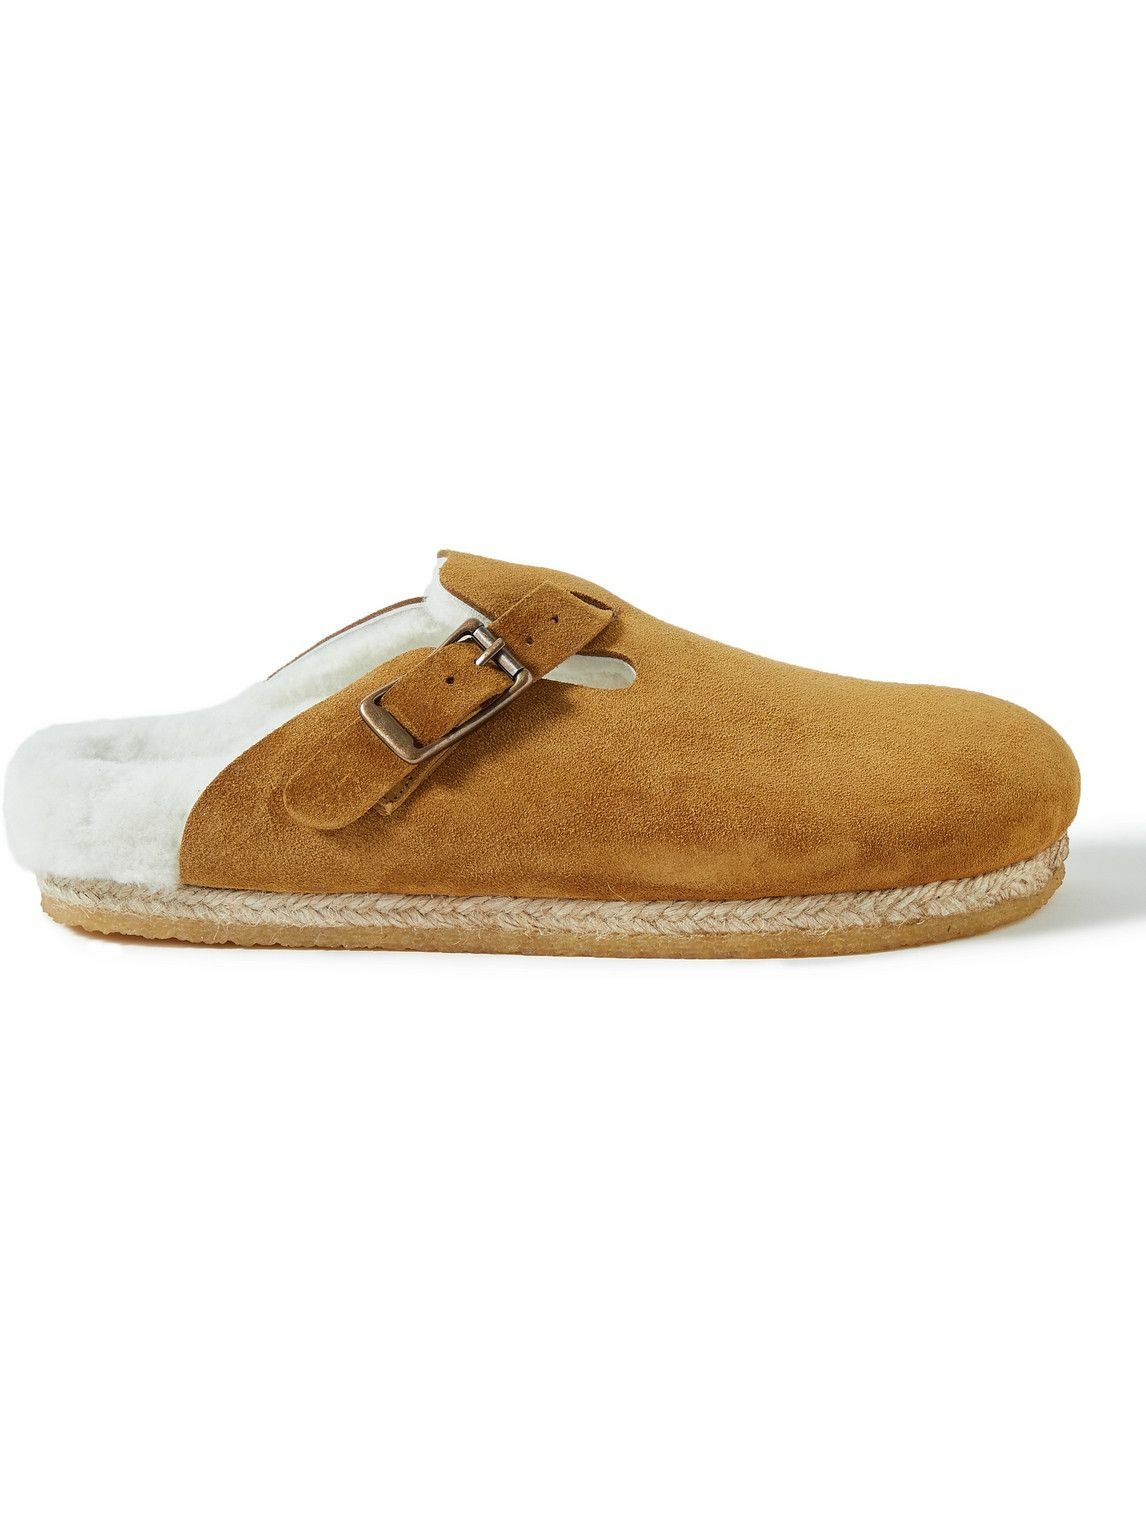 Photo: Yuketen - Sal-1 Shearling-Lined Suede Sandals - Brown